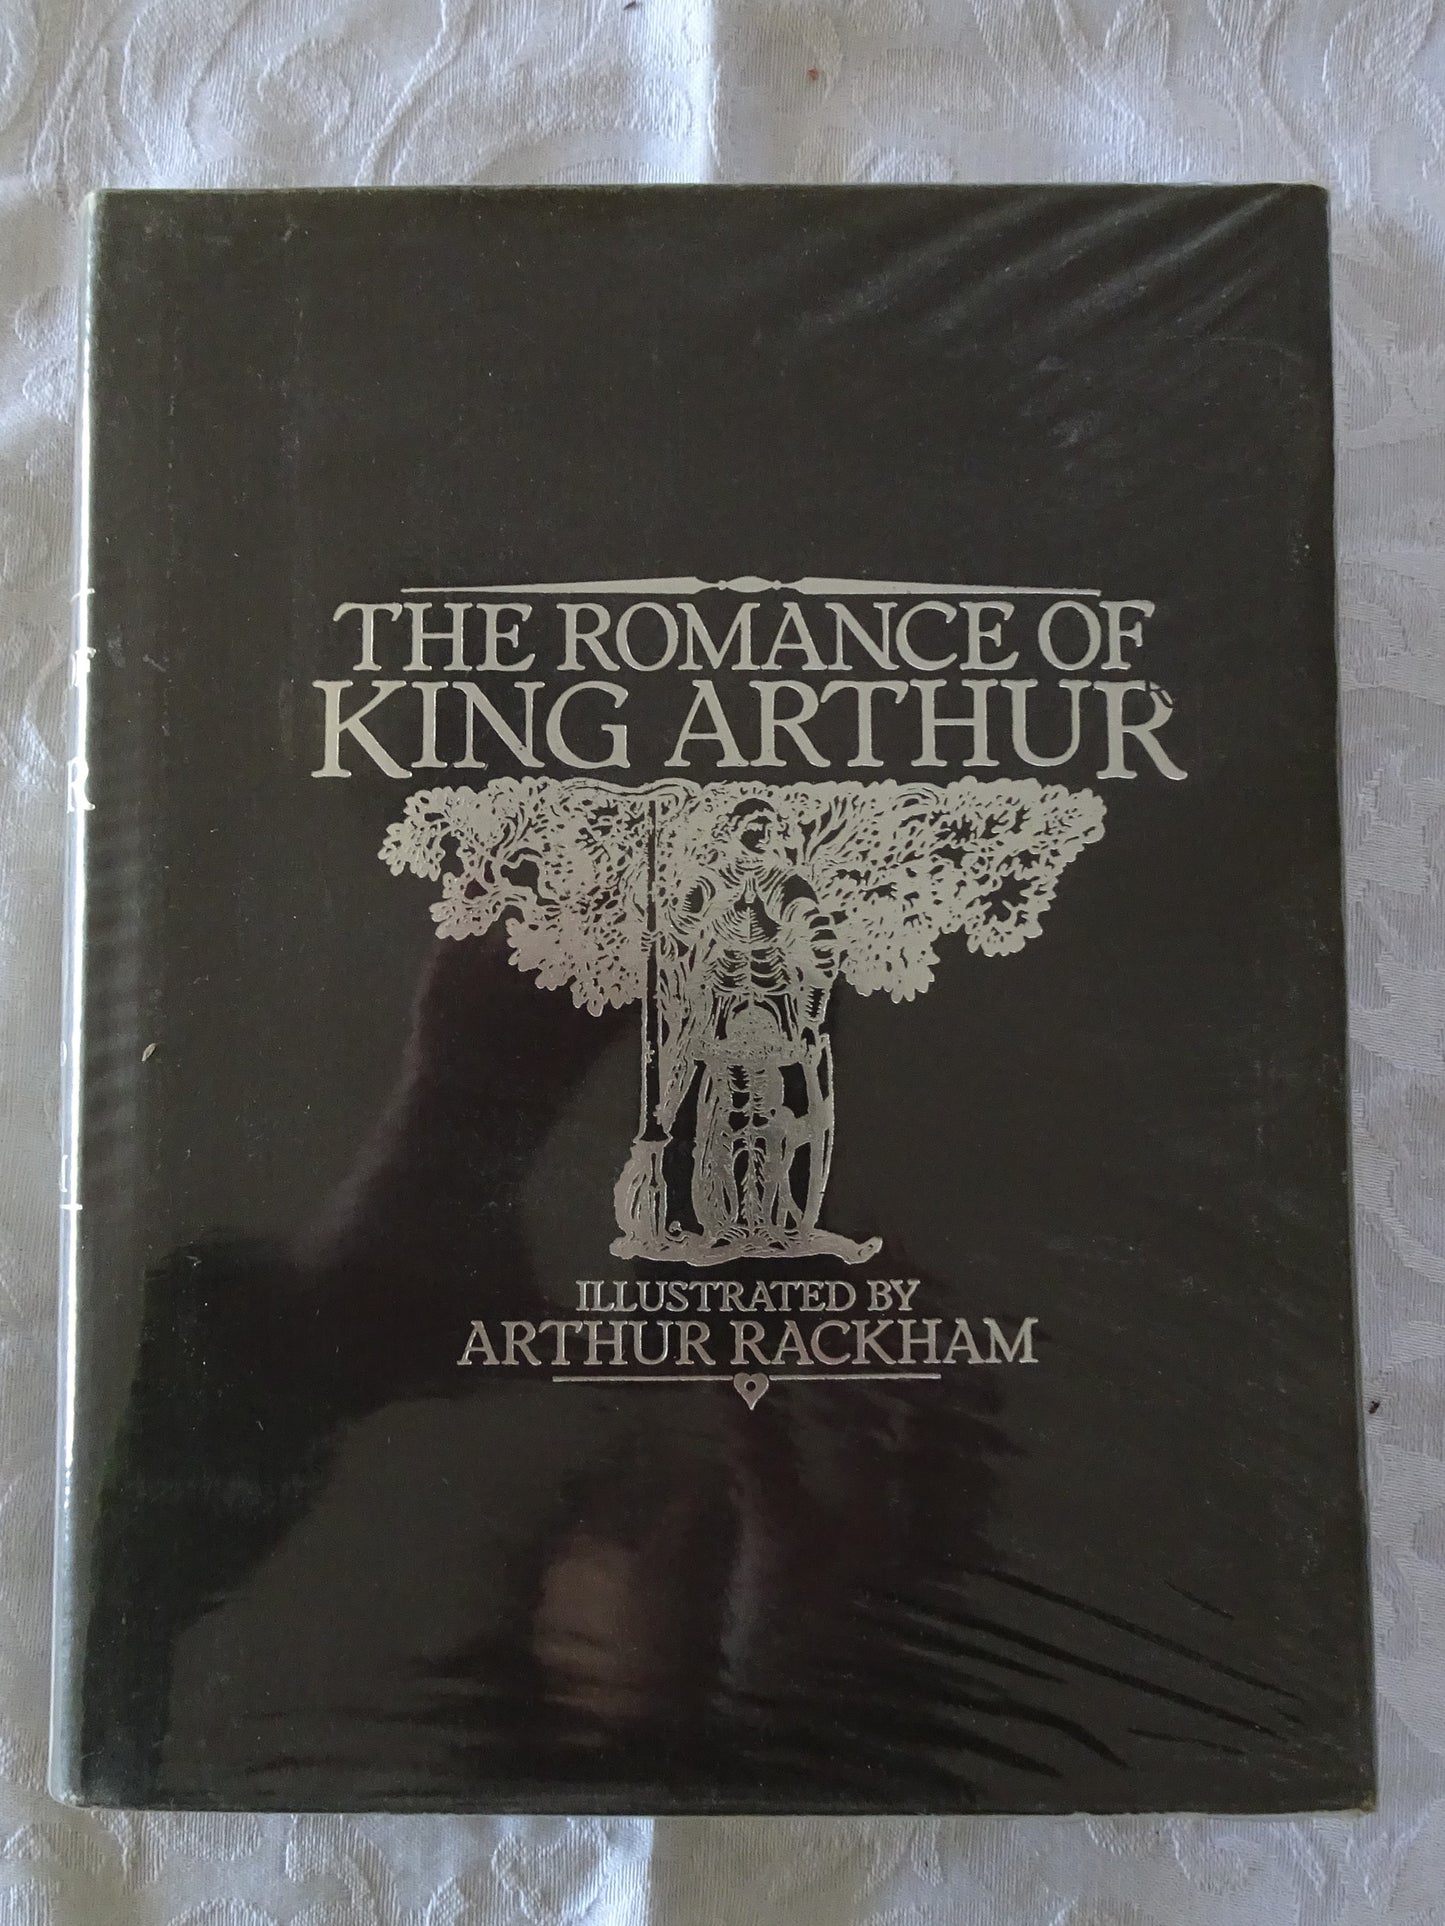 The Romance of King Arthur And His Knights of the Round Table by Alfred W. Pollard